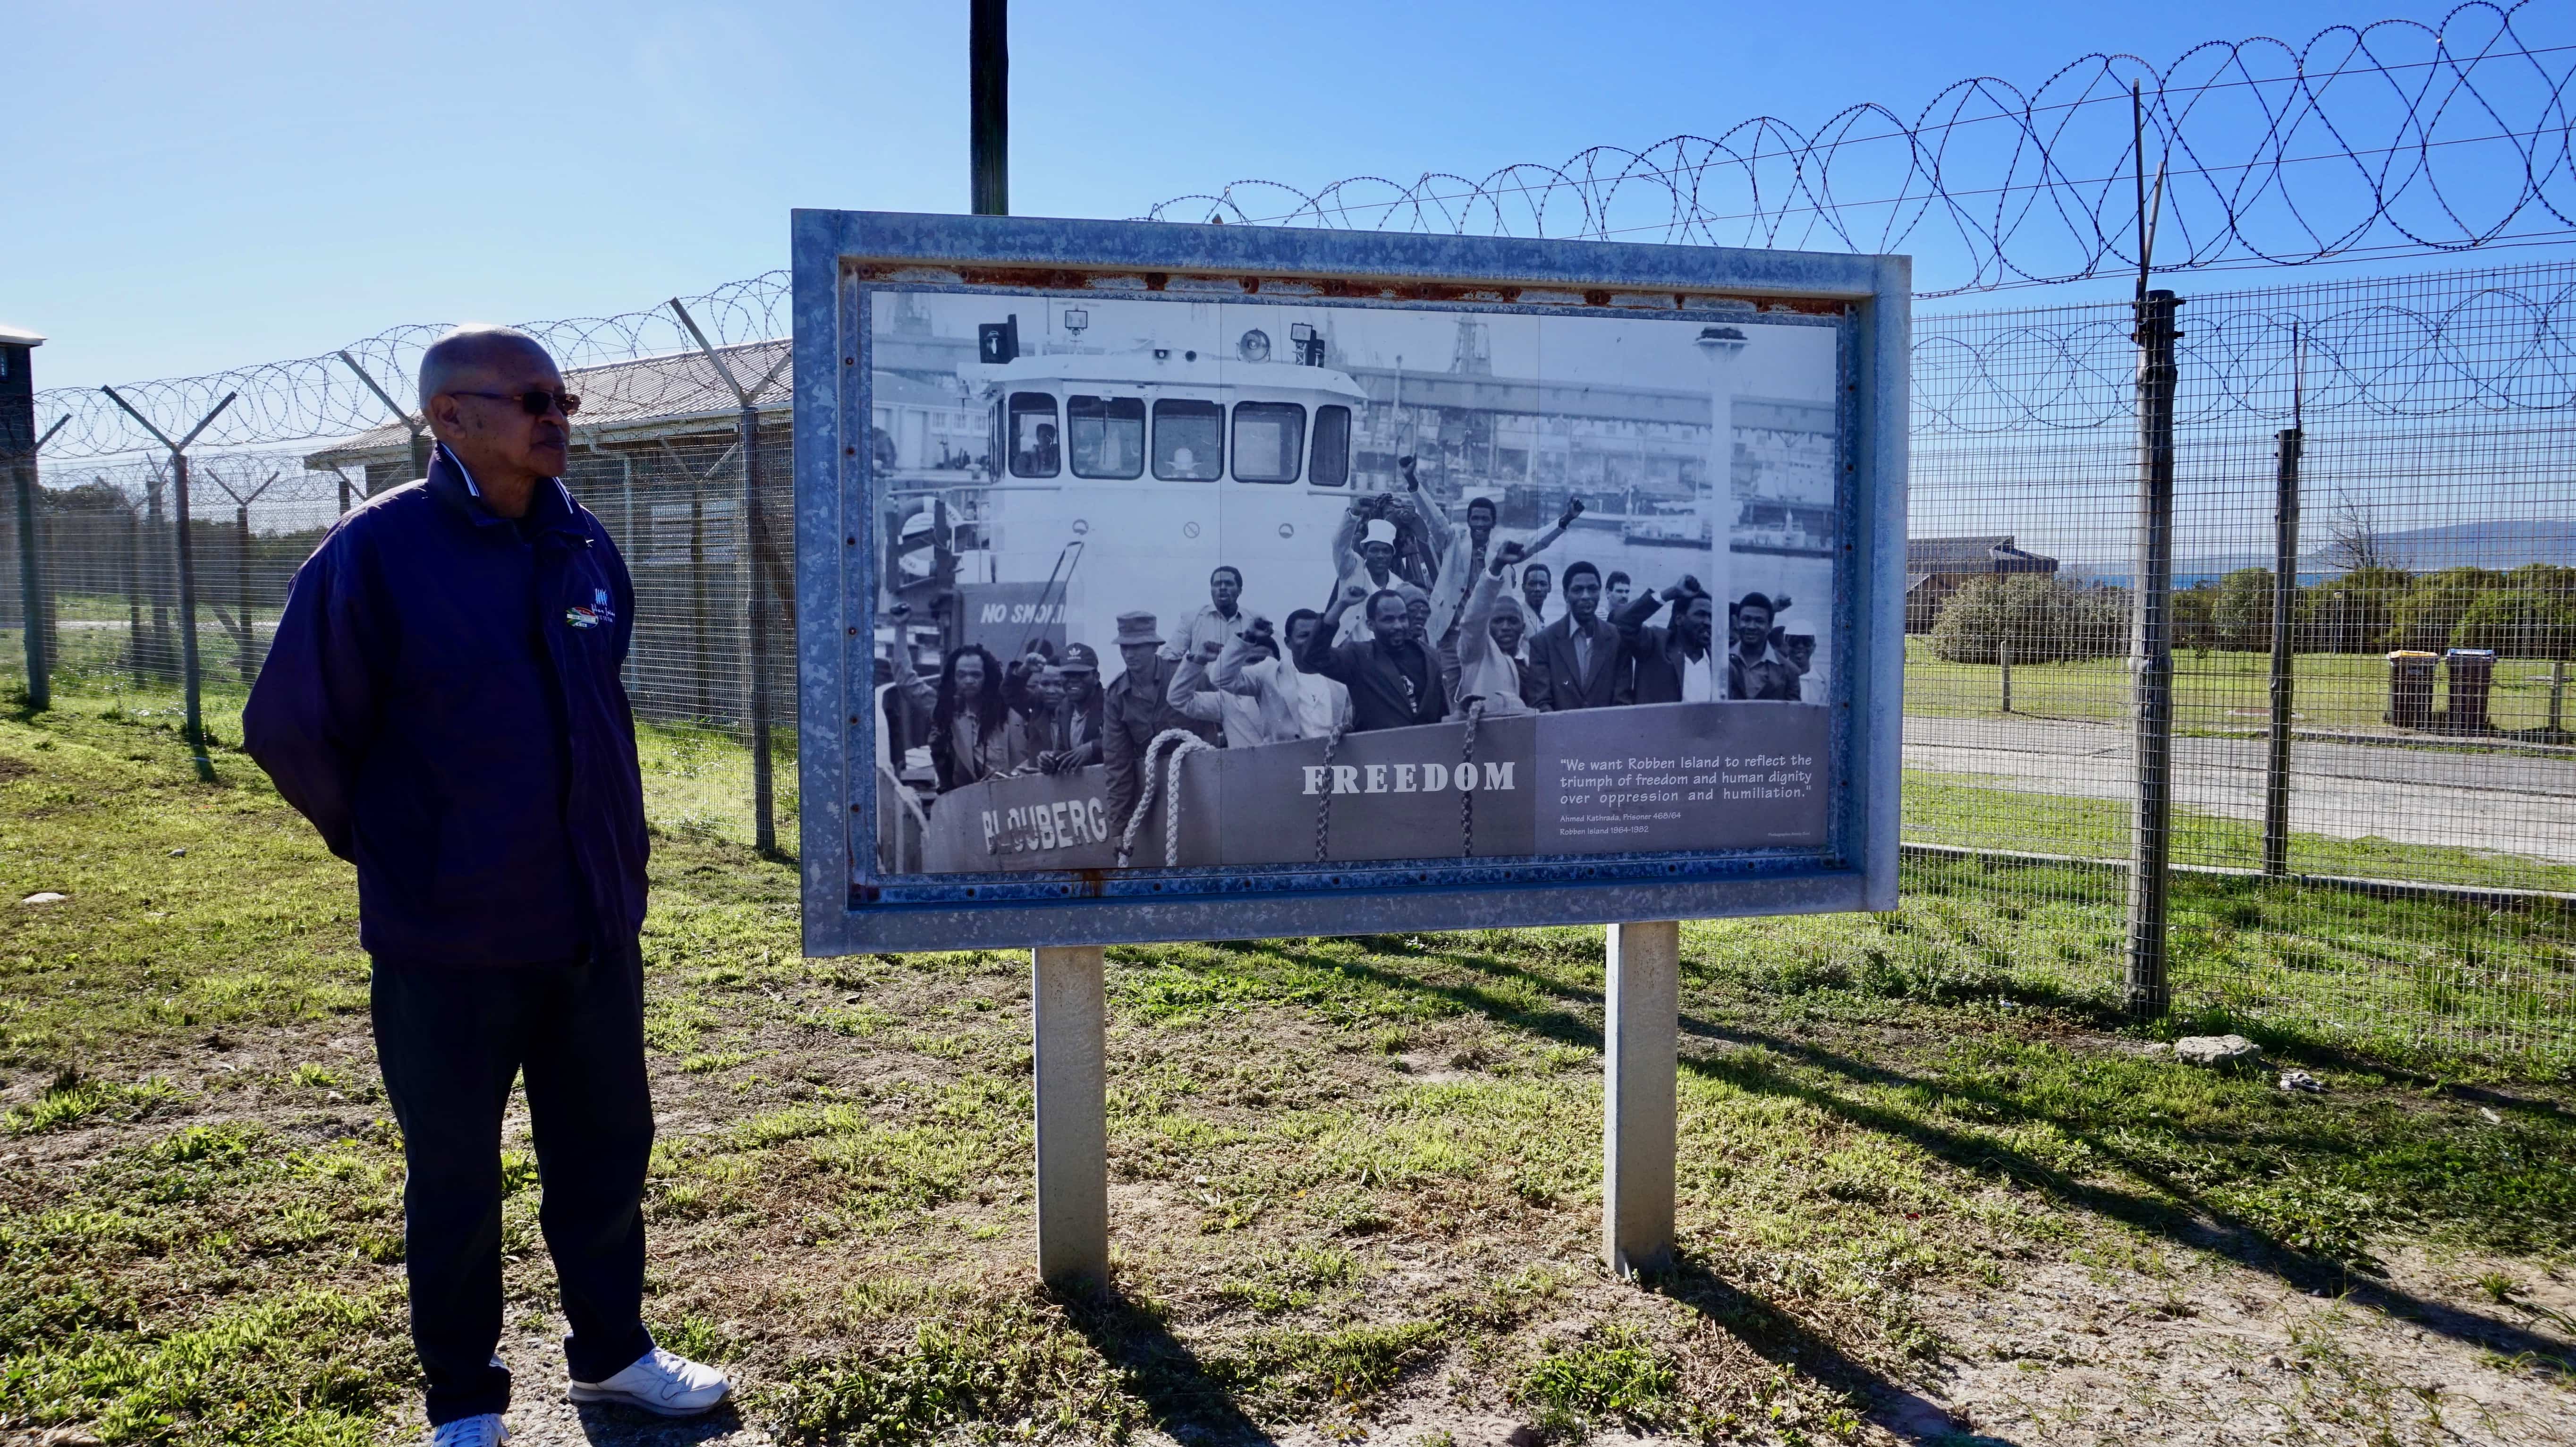 Tour guide at the Robben Island prison, Cape Town 